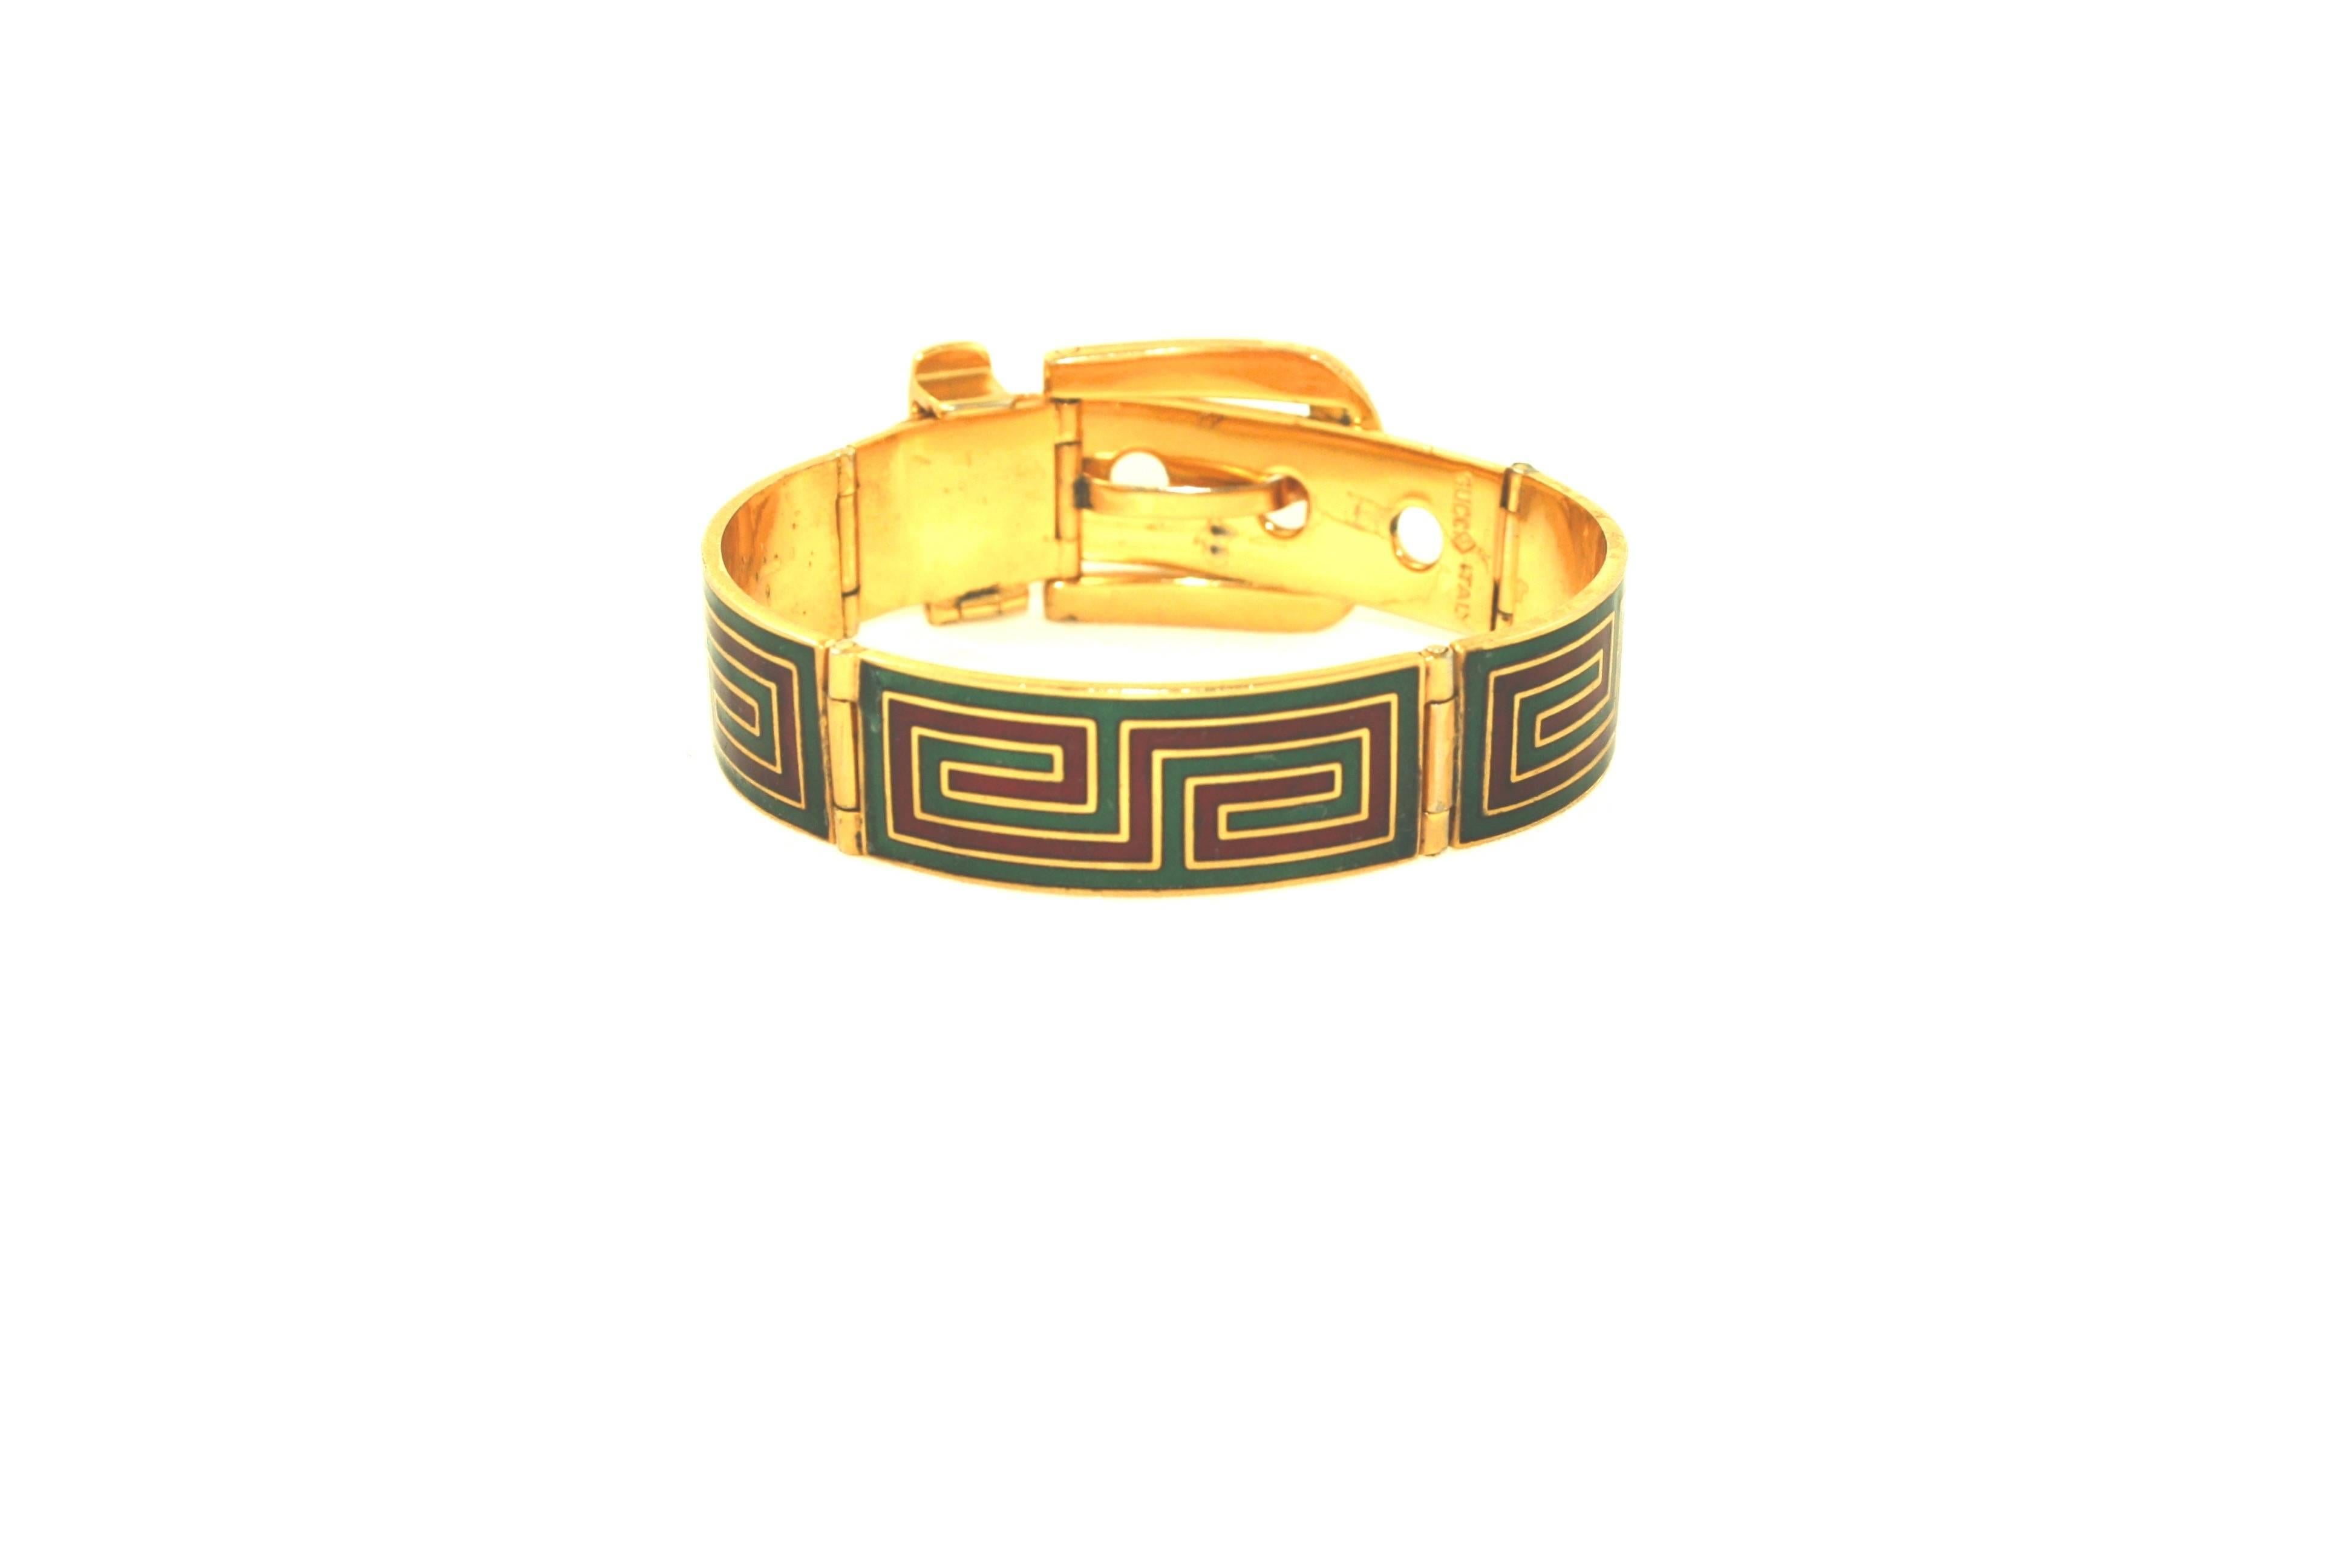 Fabulous green and red enamel panel bracelet with buckle fastening by Gucci. Marked Gucci Italy Silver. Silver with gilt plating and dated approximately 1970's. Adjustable buckle fastening, wearable length from approximately 17cm - 19cm.  